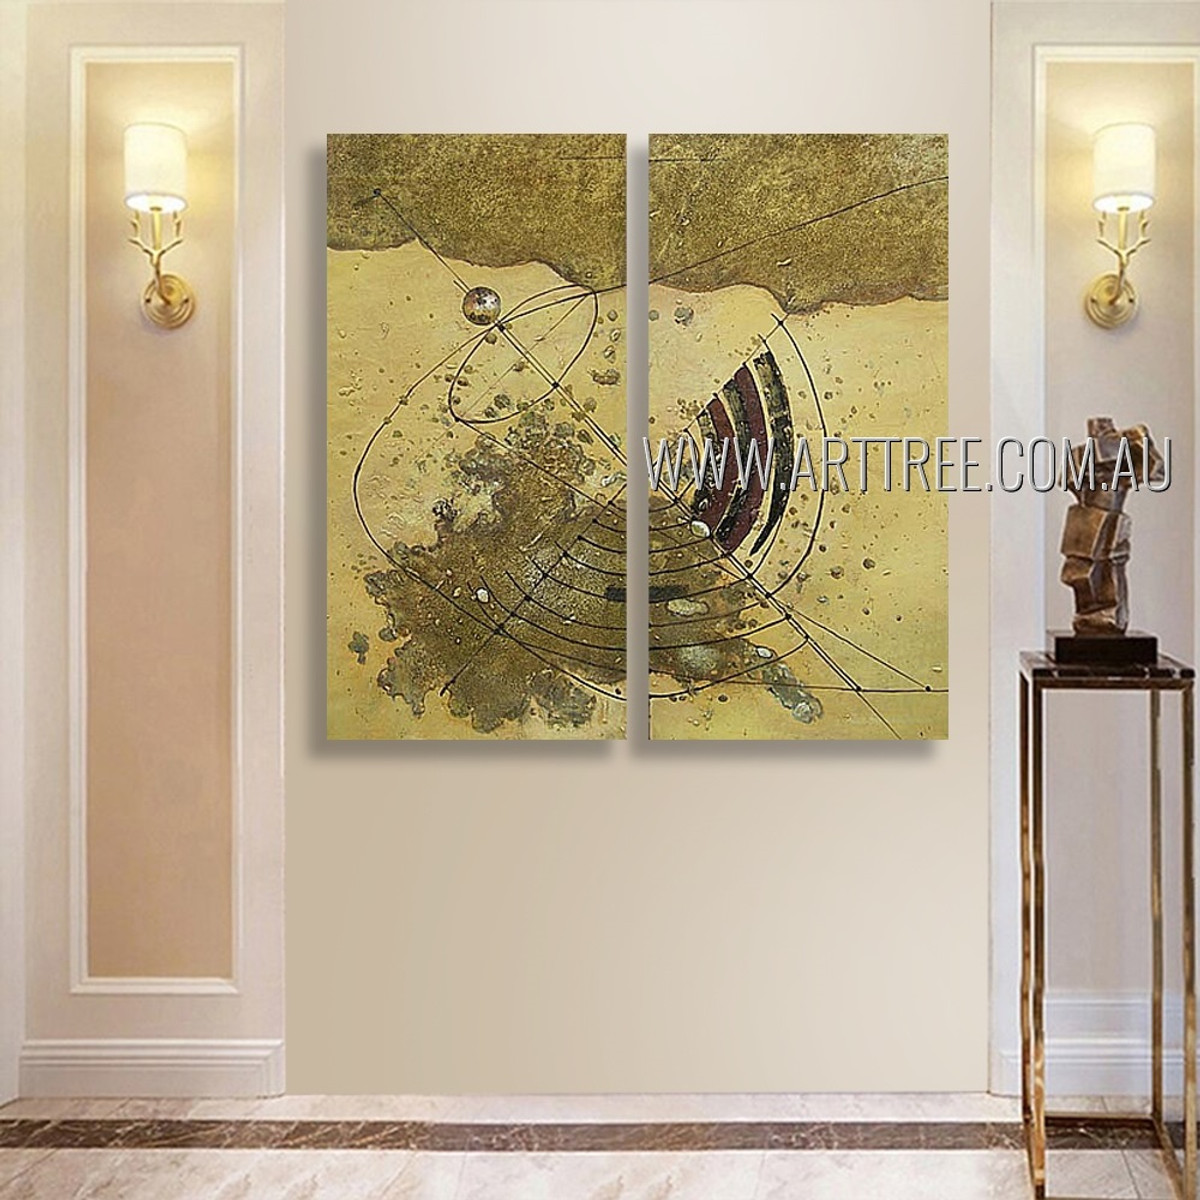 Winding Trails Abstract Vintage Heavy Texture Artist Handmade 2 Piece Split Complementary Painting Wall Art Set For Room Decoration